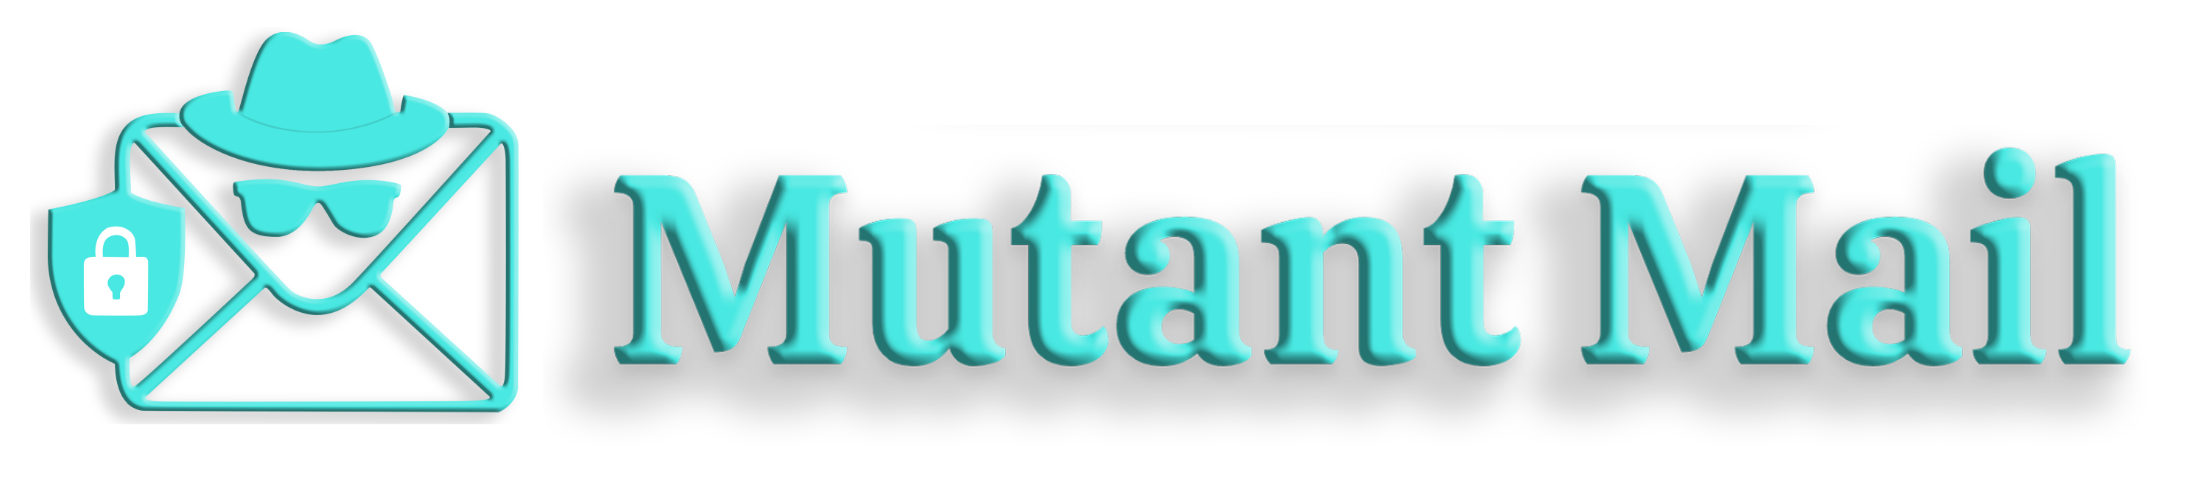 Mutant Mail Logo With Text Rectangle dimension